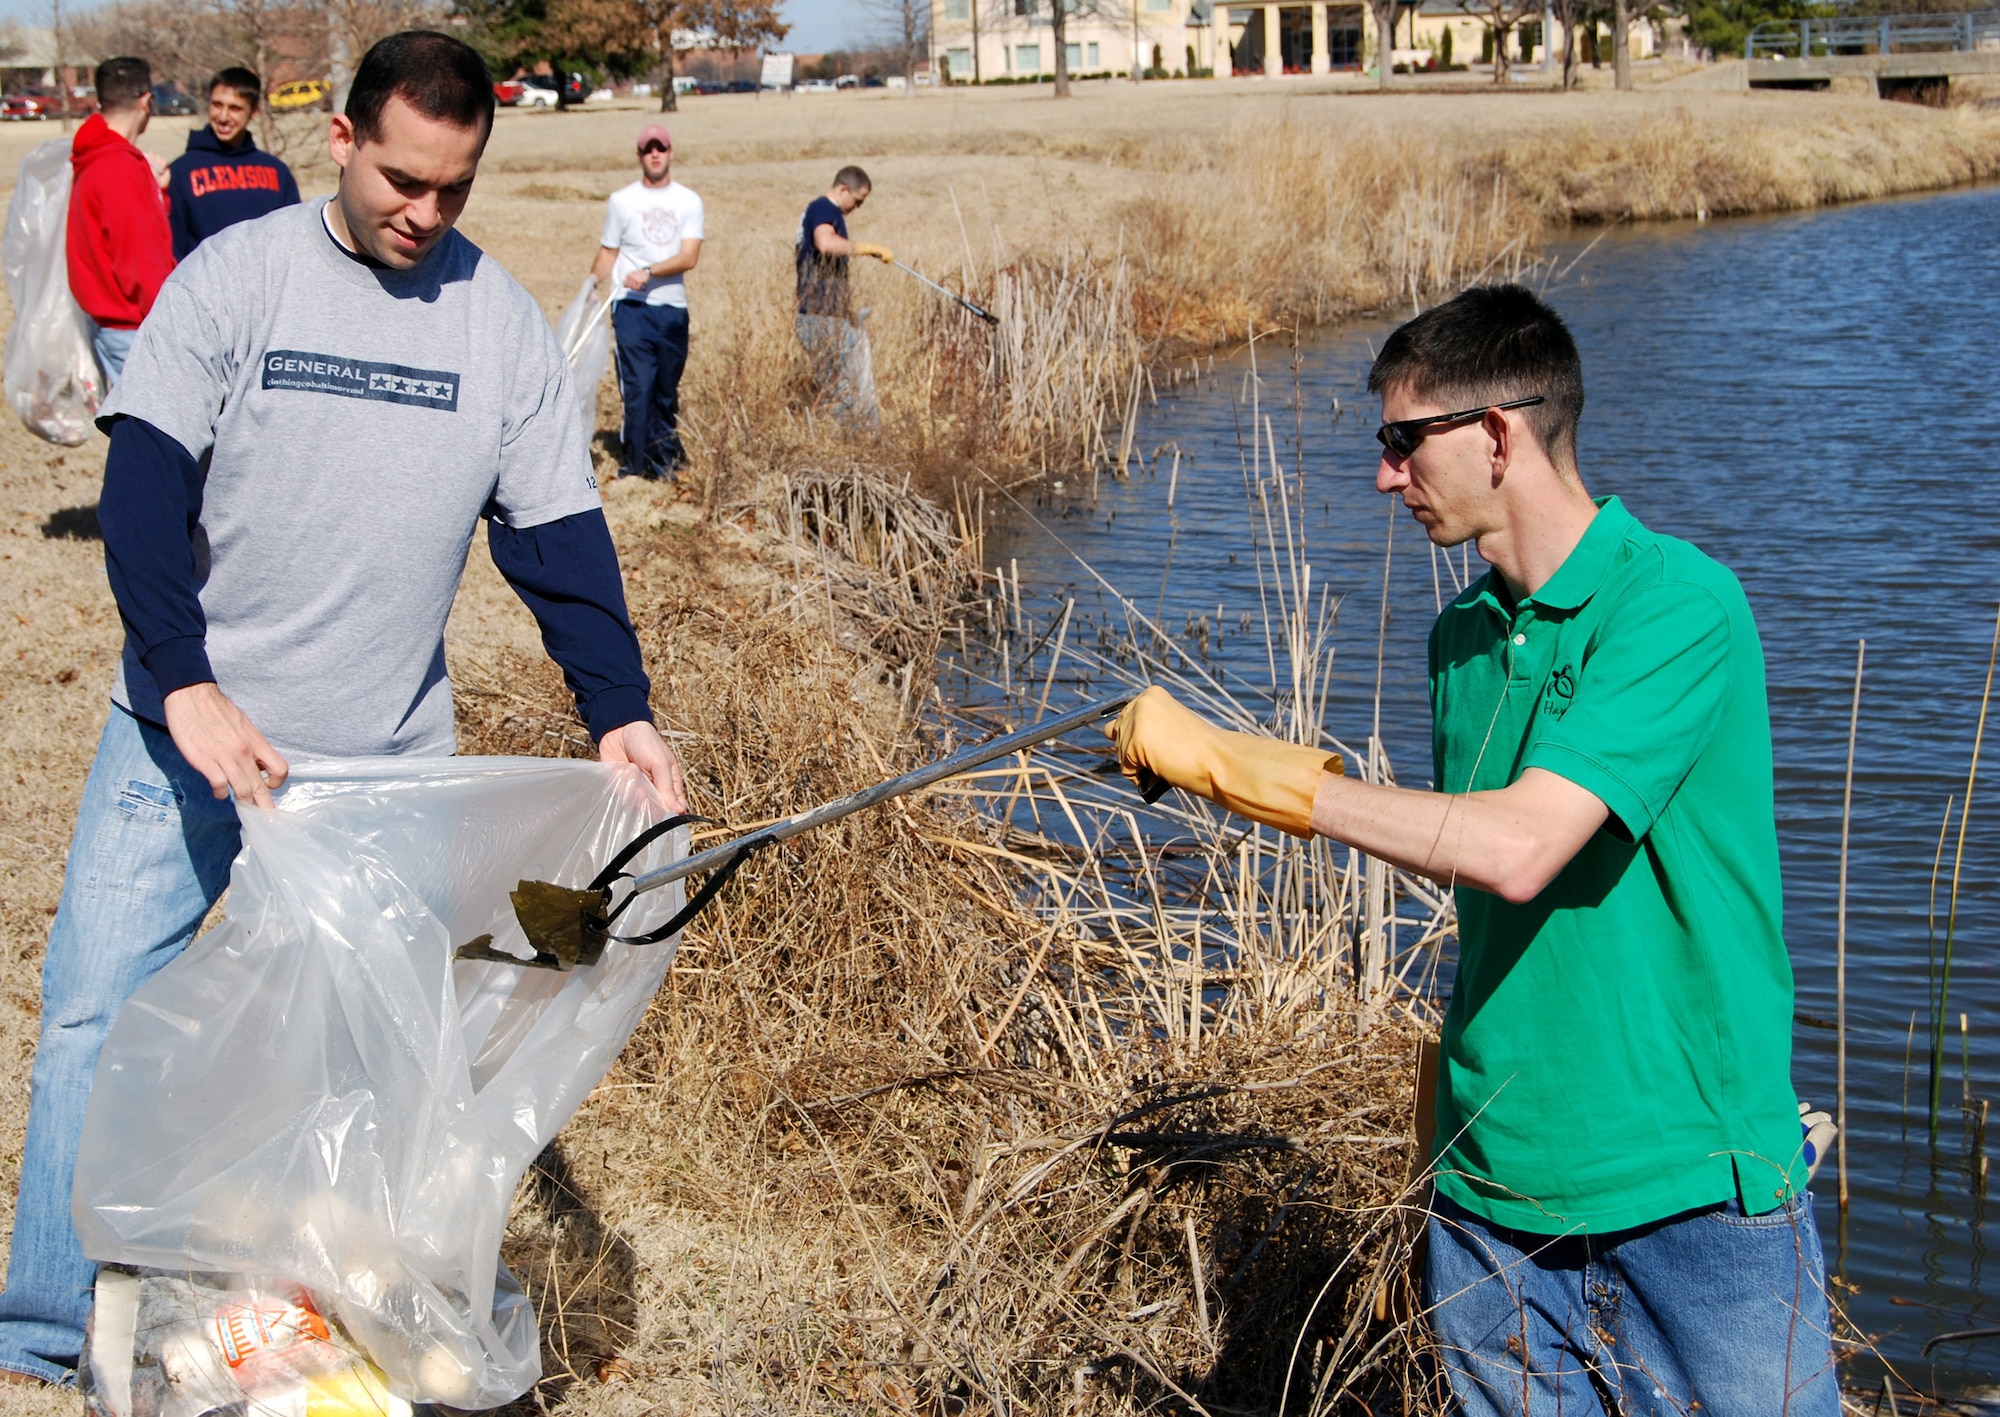 Second Lt. Steven Montalvo, left, and Capt. Peter Moughan, both from the 80th Operations Support Squadron, team up Feb. 29 to help clean up Quail Creek that feeds into Sikes Lake near Midwestern State Univeristy in Wichita Falls, Texas. Members of the 80th OSS get out once a month to perform a community service in one of Sheppard Air Force Base's surrounding cities. (U.S. Air Force photo/Mike McKito)